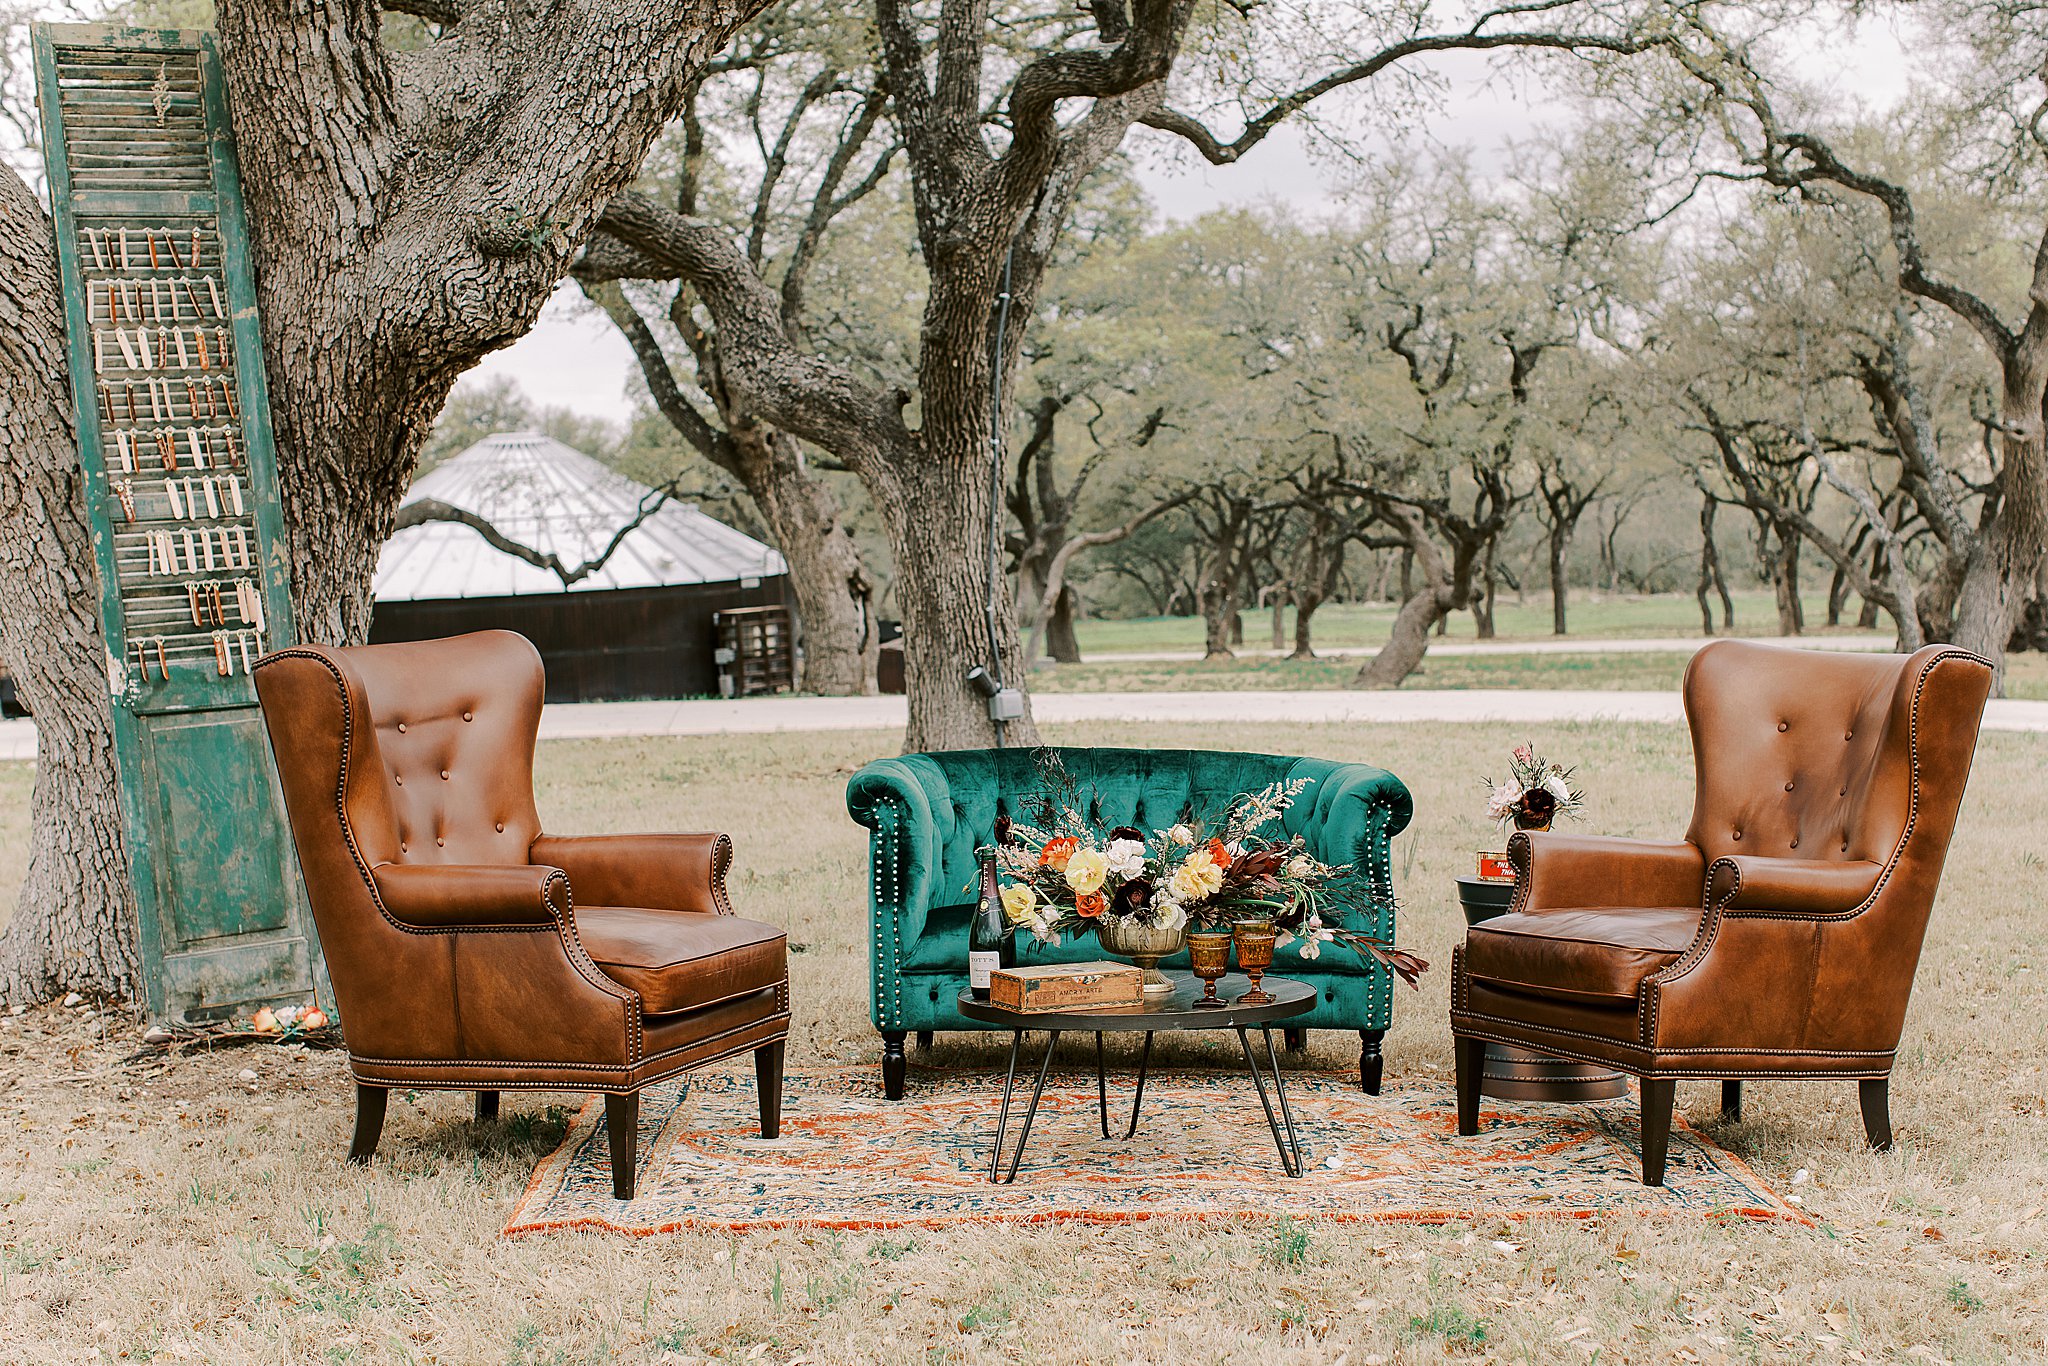 Fall rustic outdoor wedding with green velvet chair, leather chairs